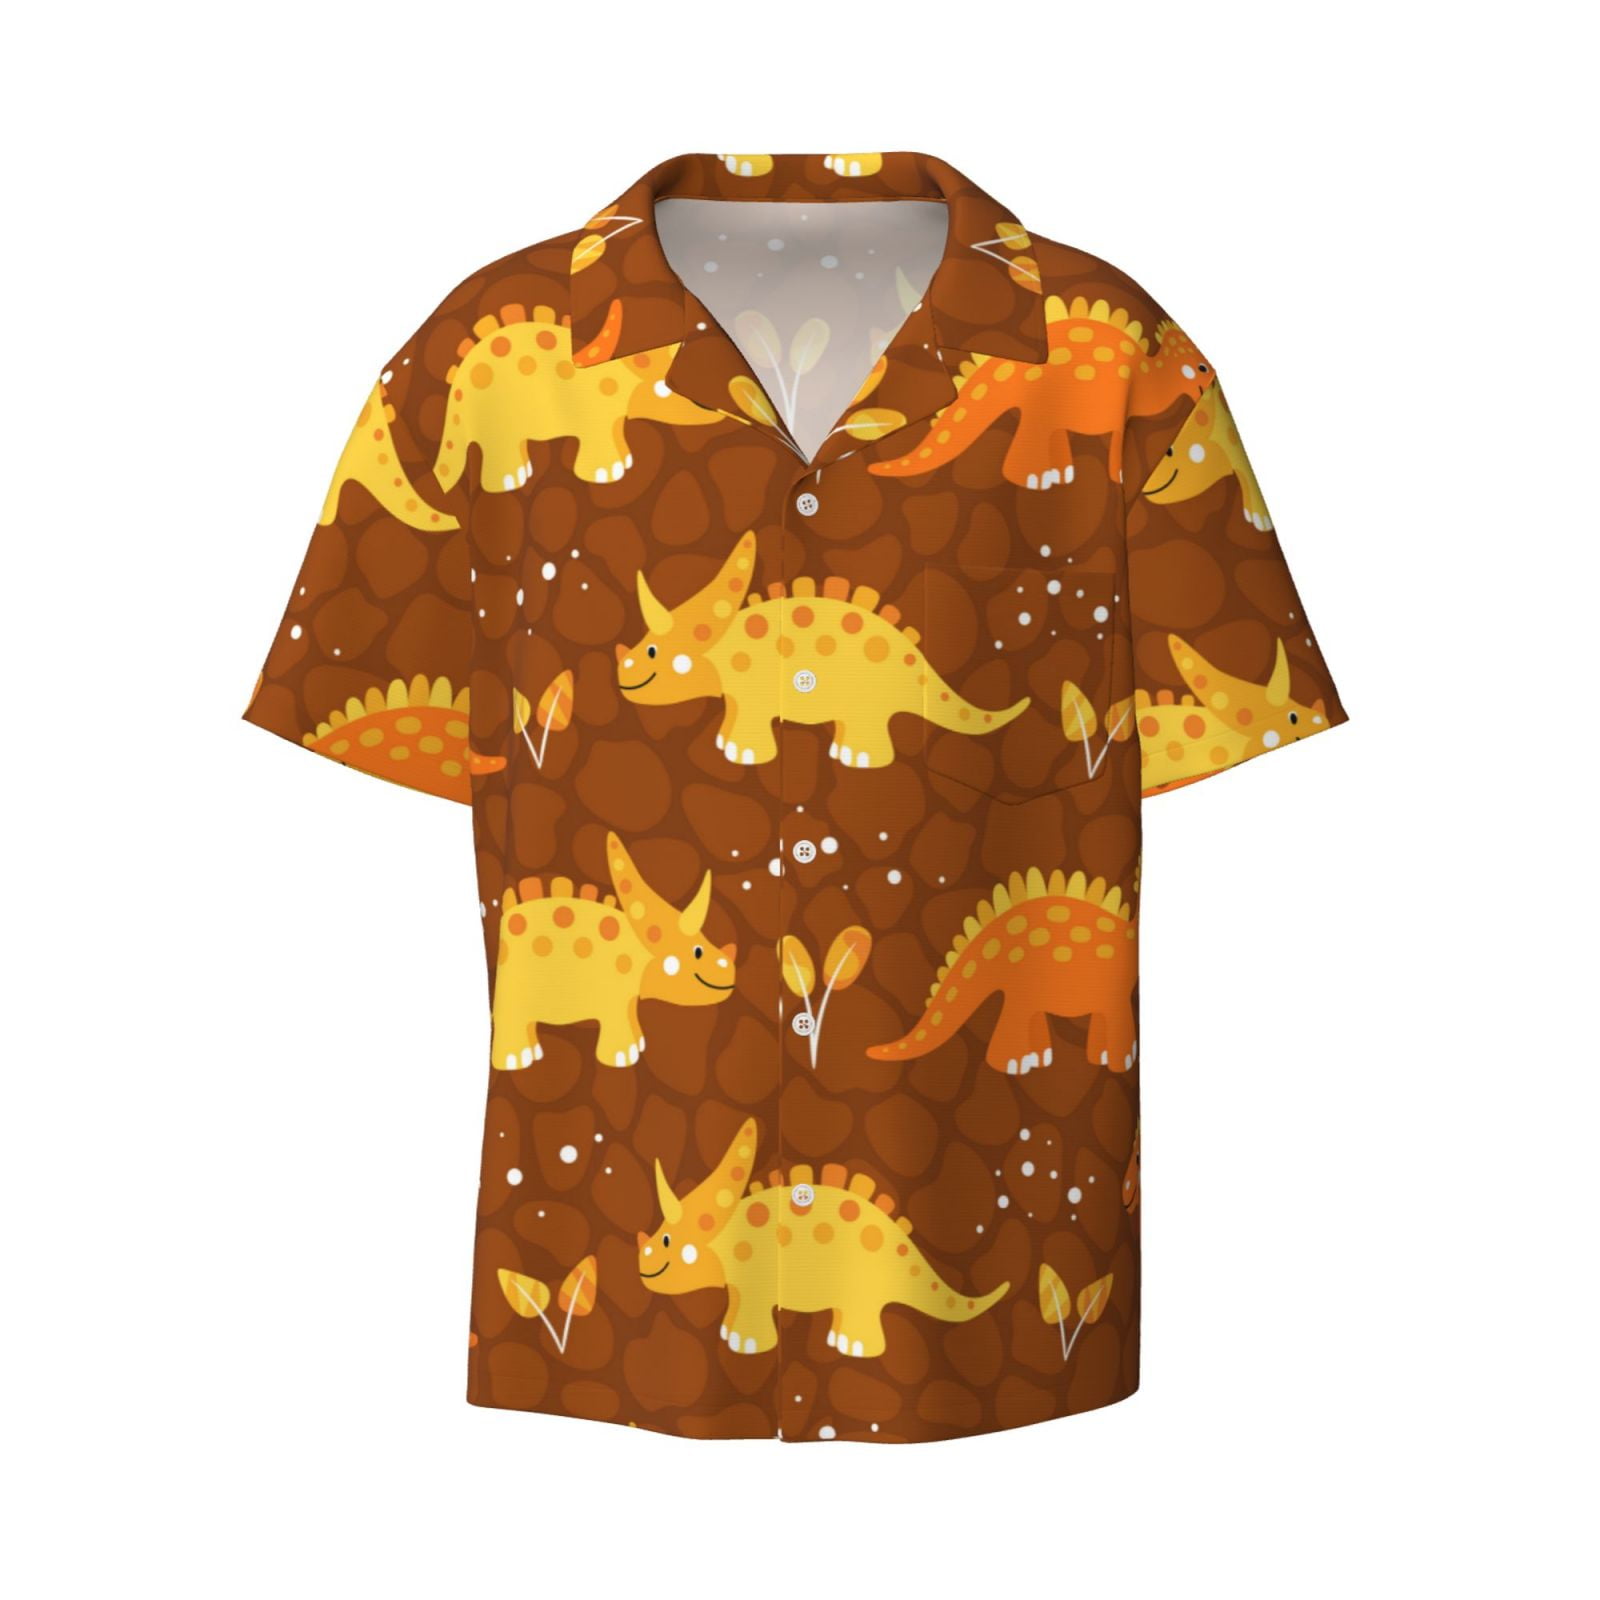 Easygdp Dinosaurs and Leaves Men's Casual Short-sleeved Shirt with ...